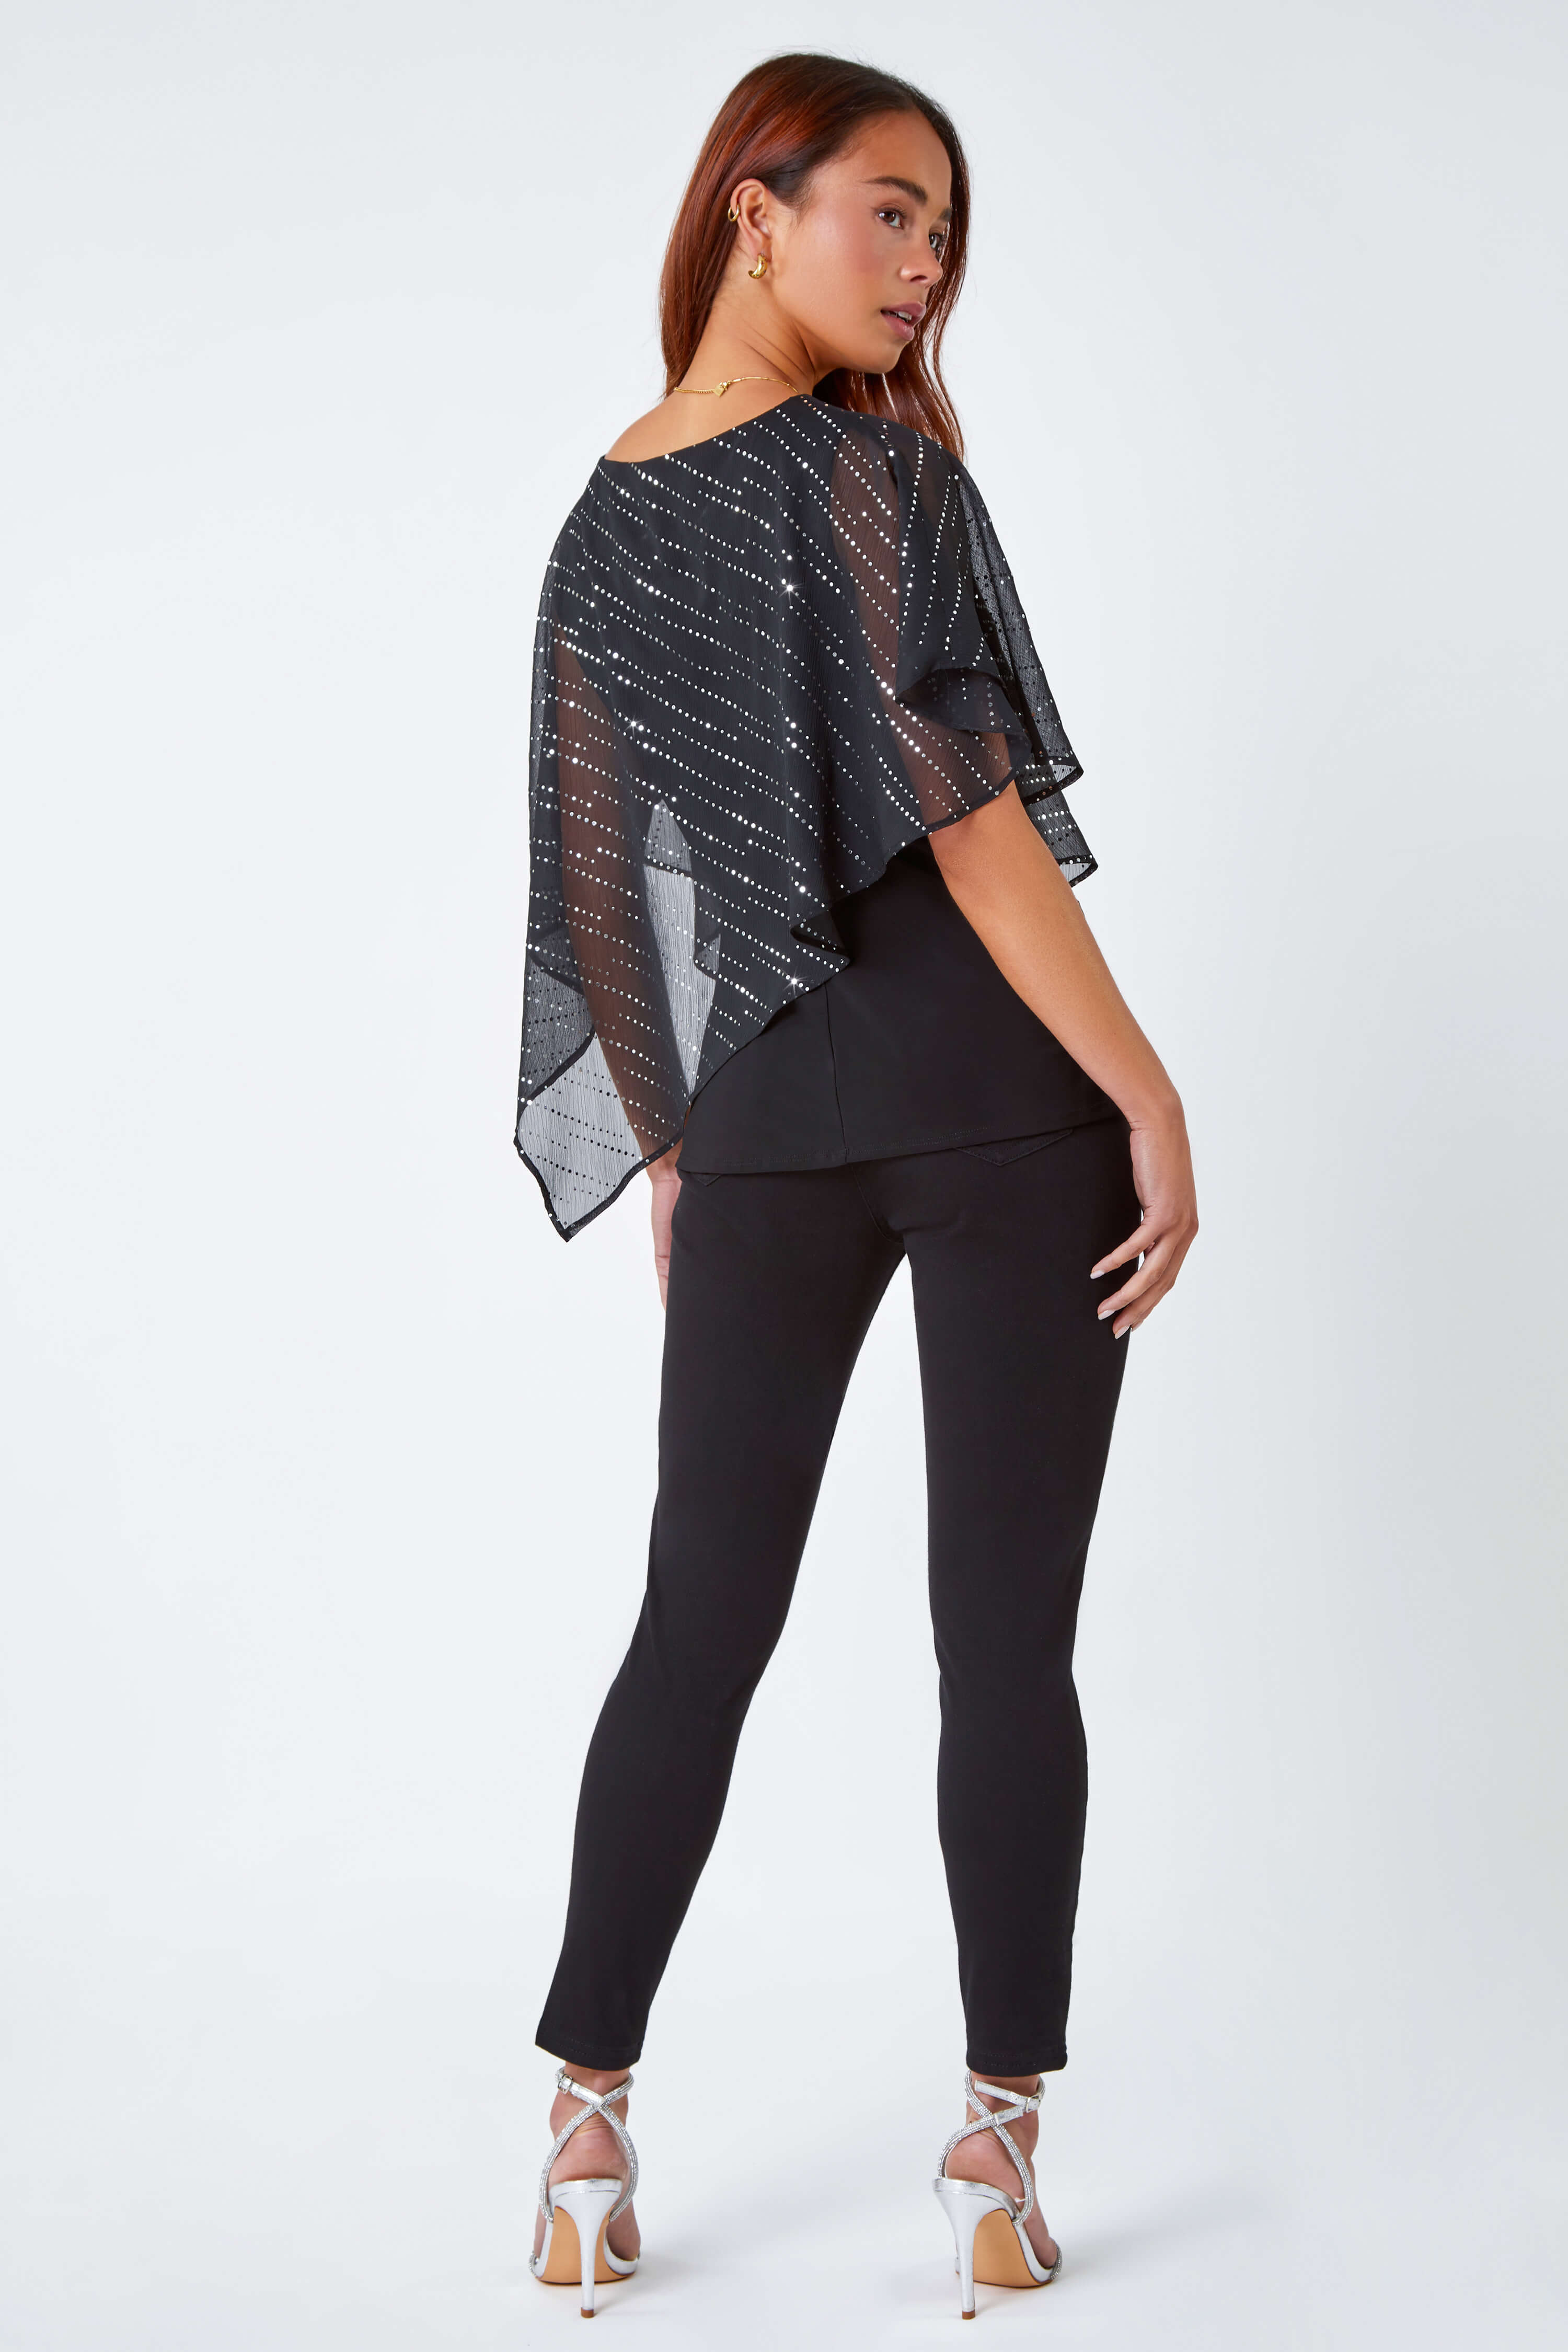 Multi  Petite Shimmer Chiffon Overlay Stretch Top, Image 3 of 5